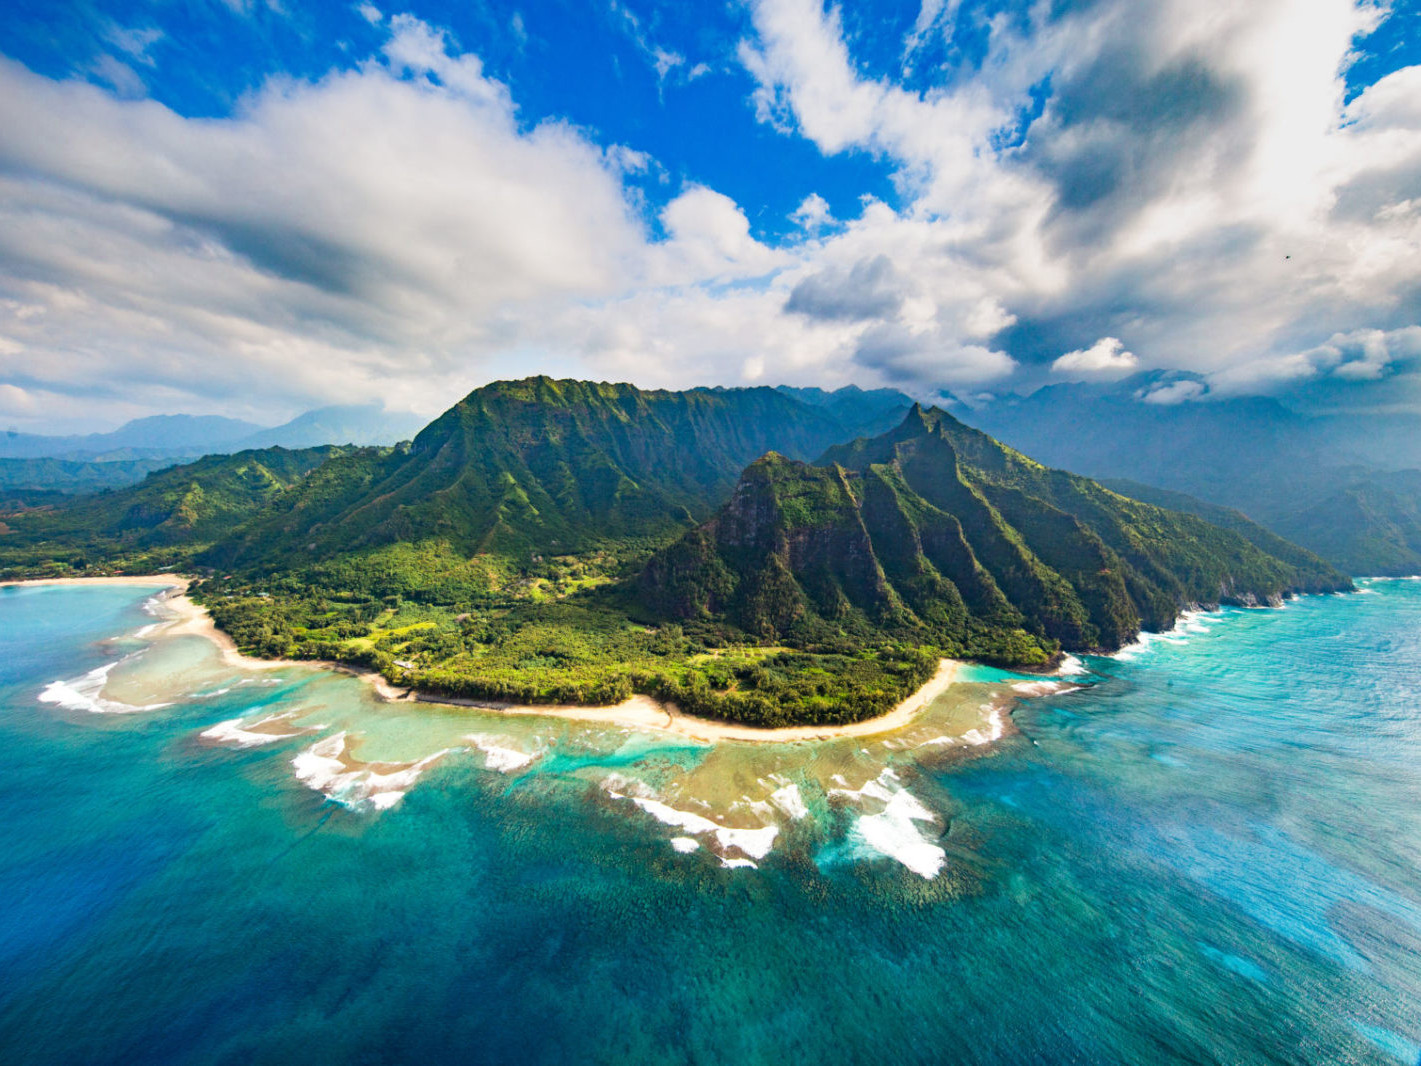 7 Things to do in Hawaii